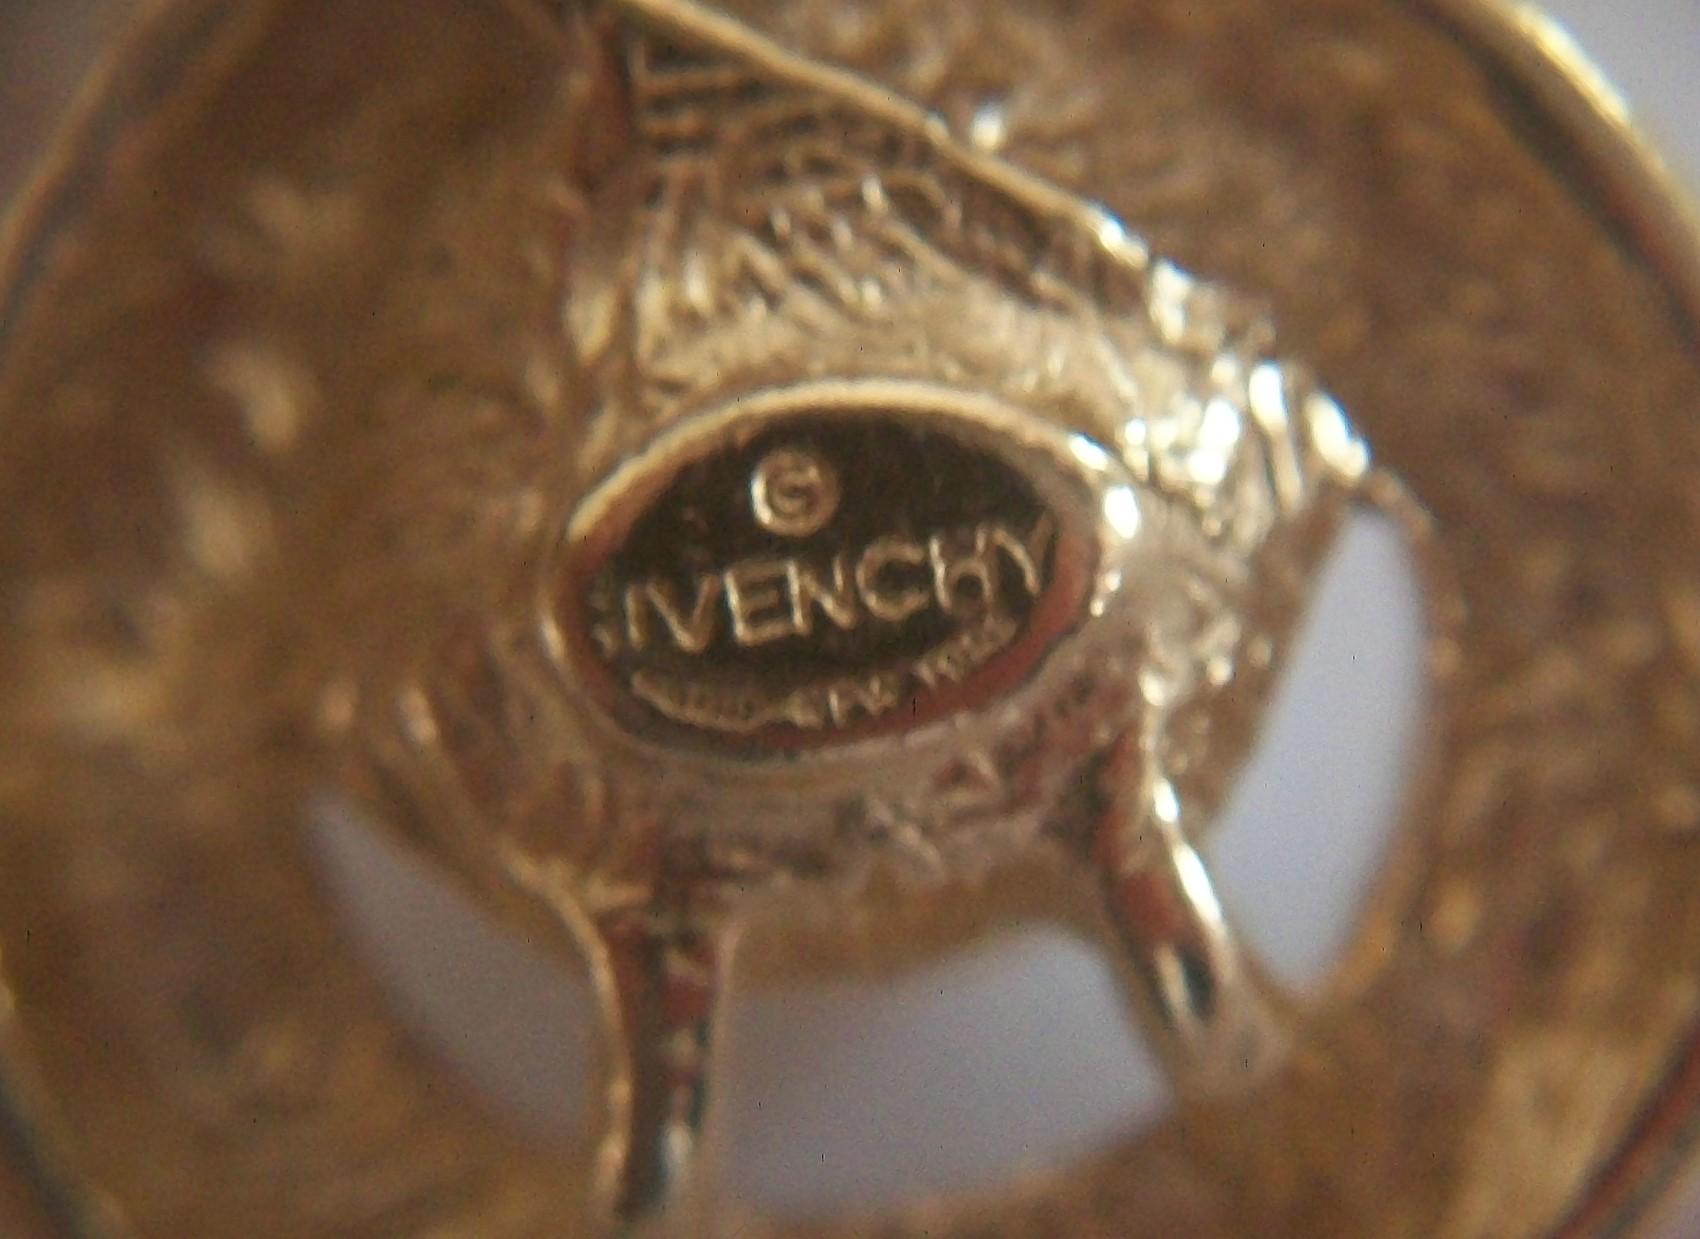 givenchy vintage earrings